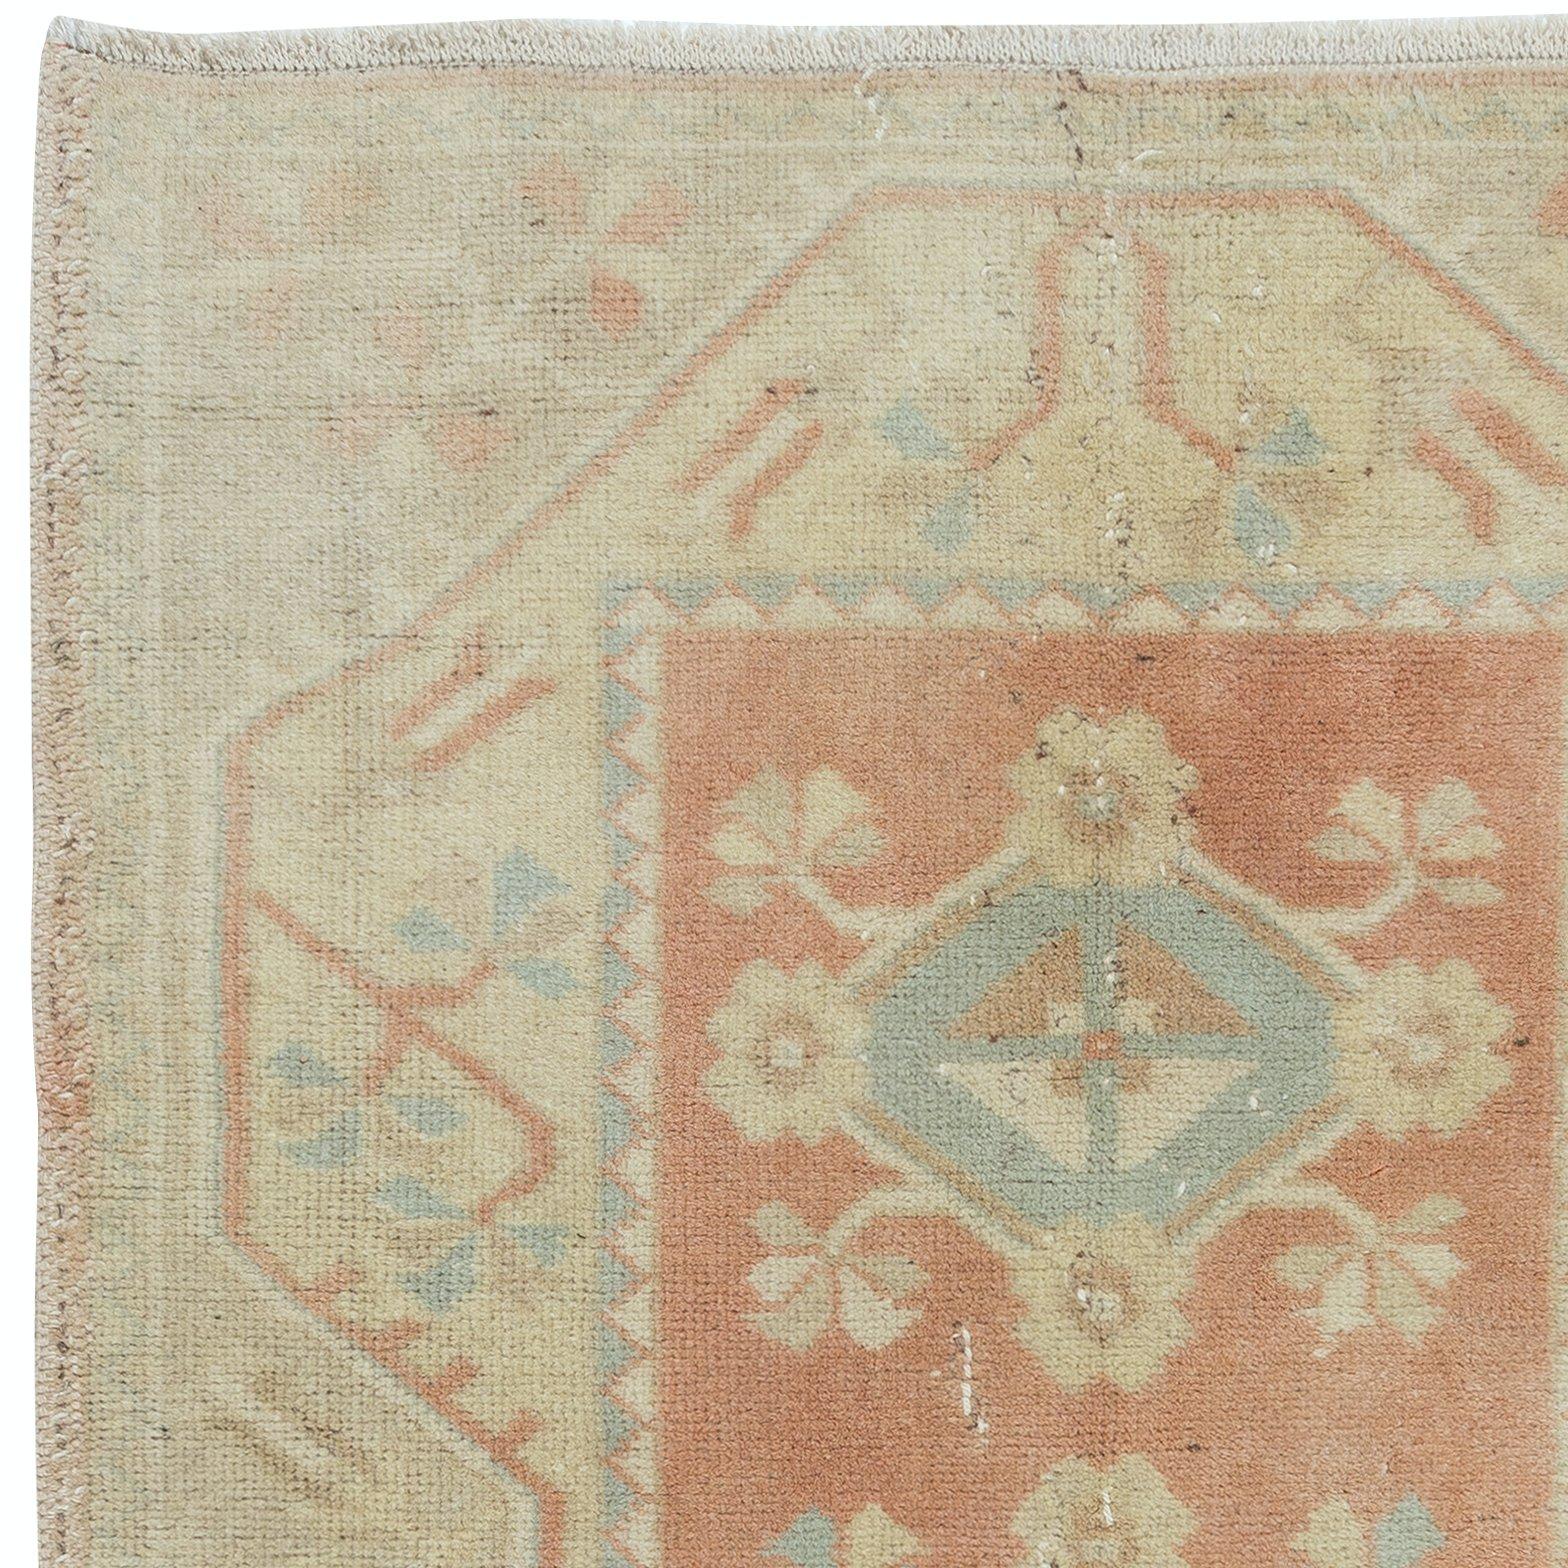 Hand-Knotted 2.6x4.2 Ft Faded Vintage Handmade Turkish Milas Accent Rug in Soft Red & Beige For Sale